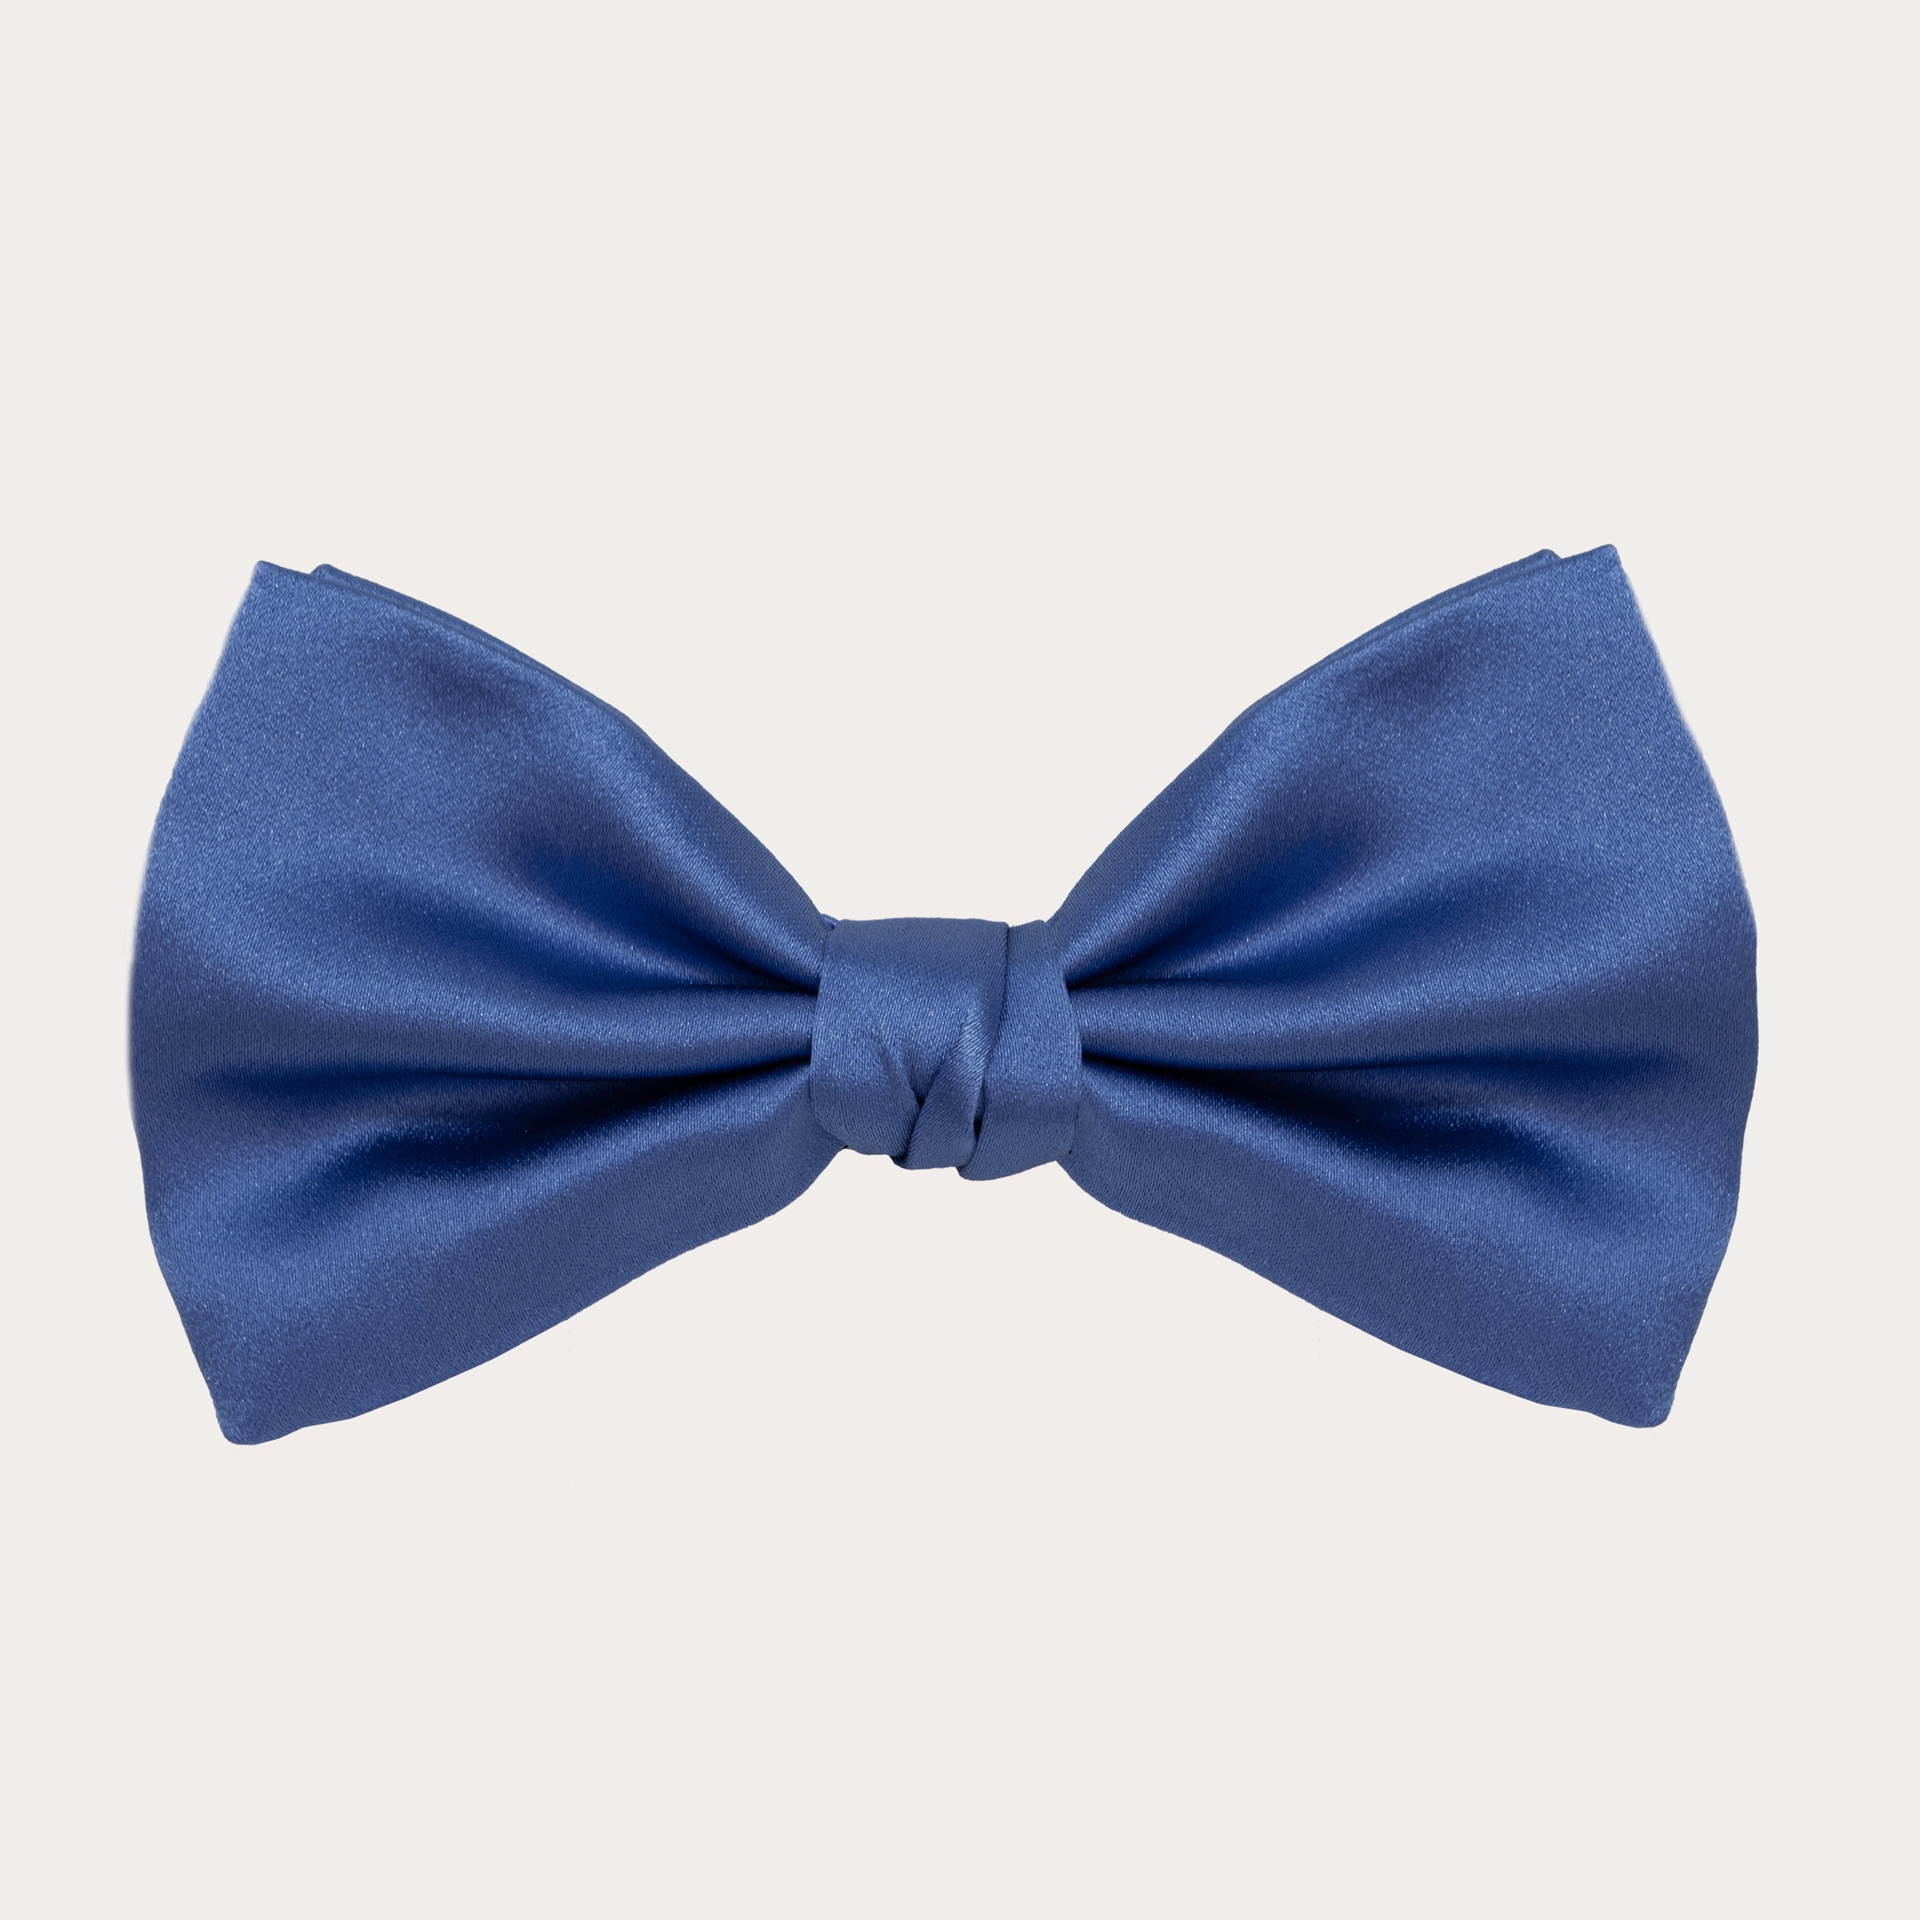 BRUCLE Classic bow tie in silk satin, light blue